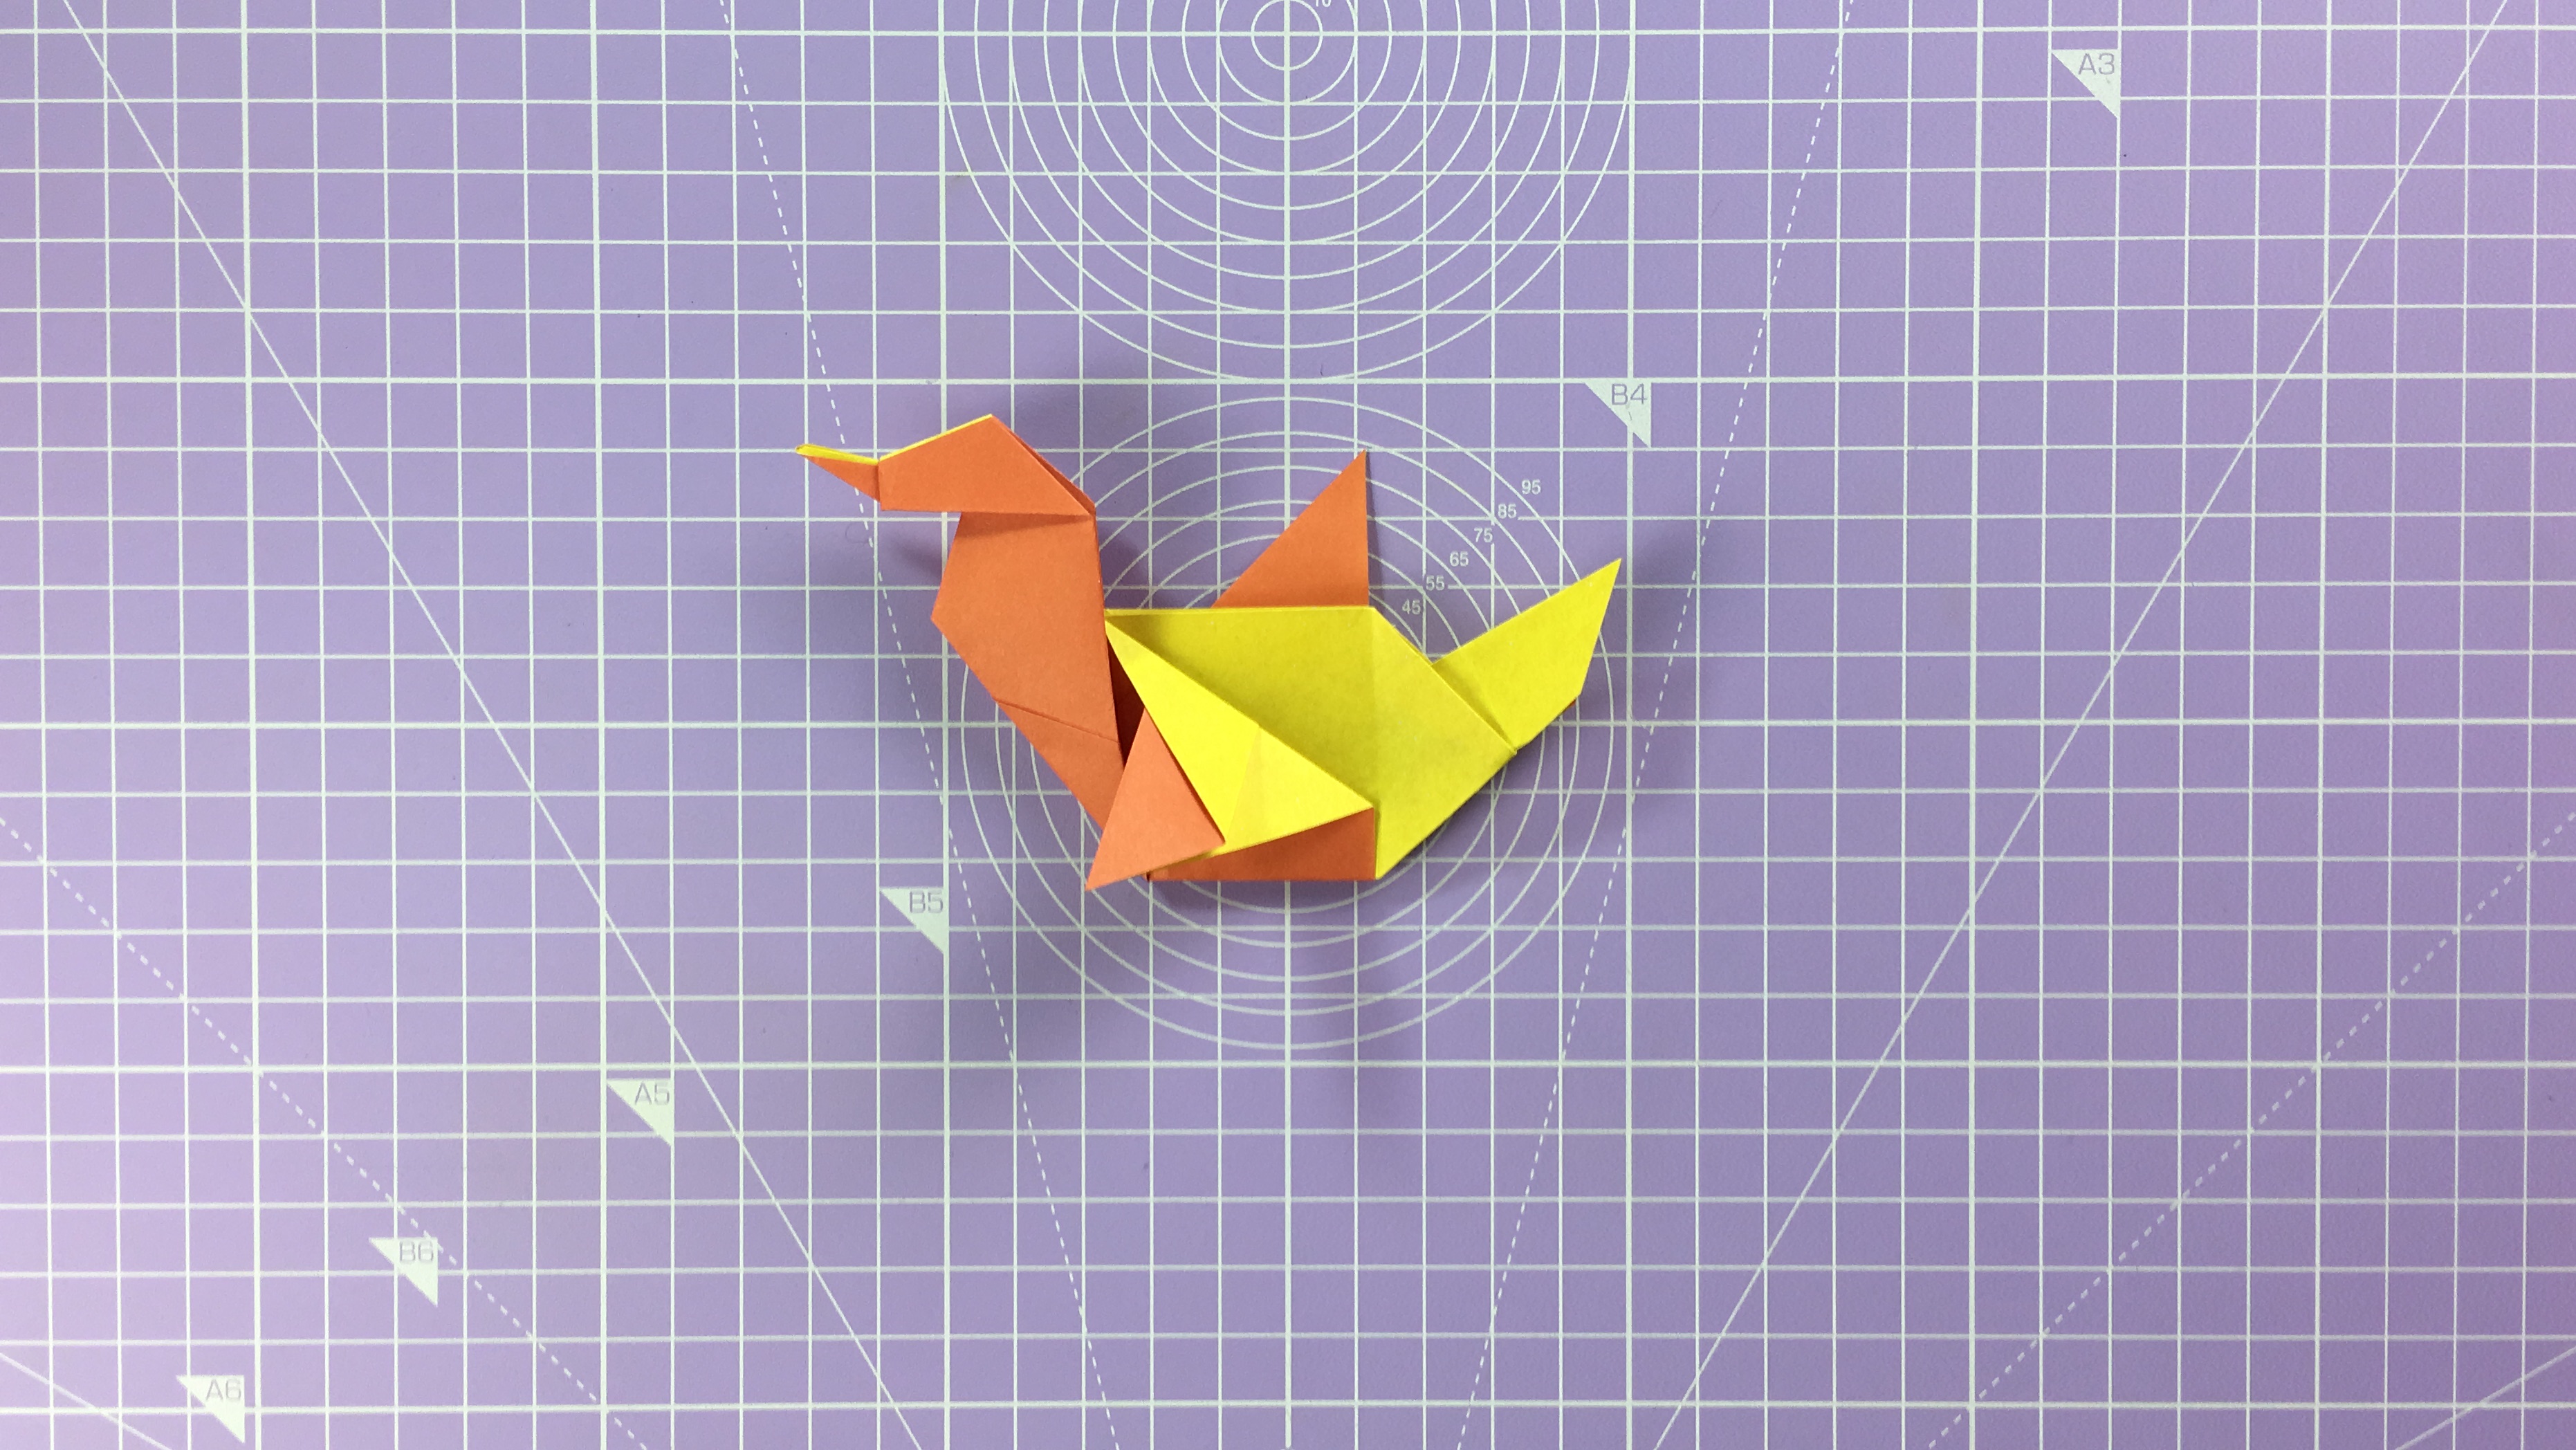 How to make an origami duck - step 22a